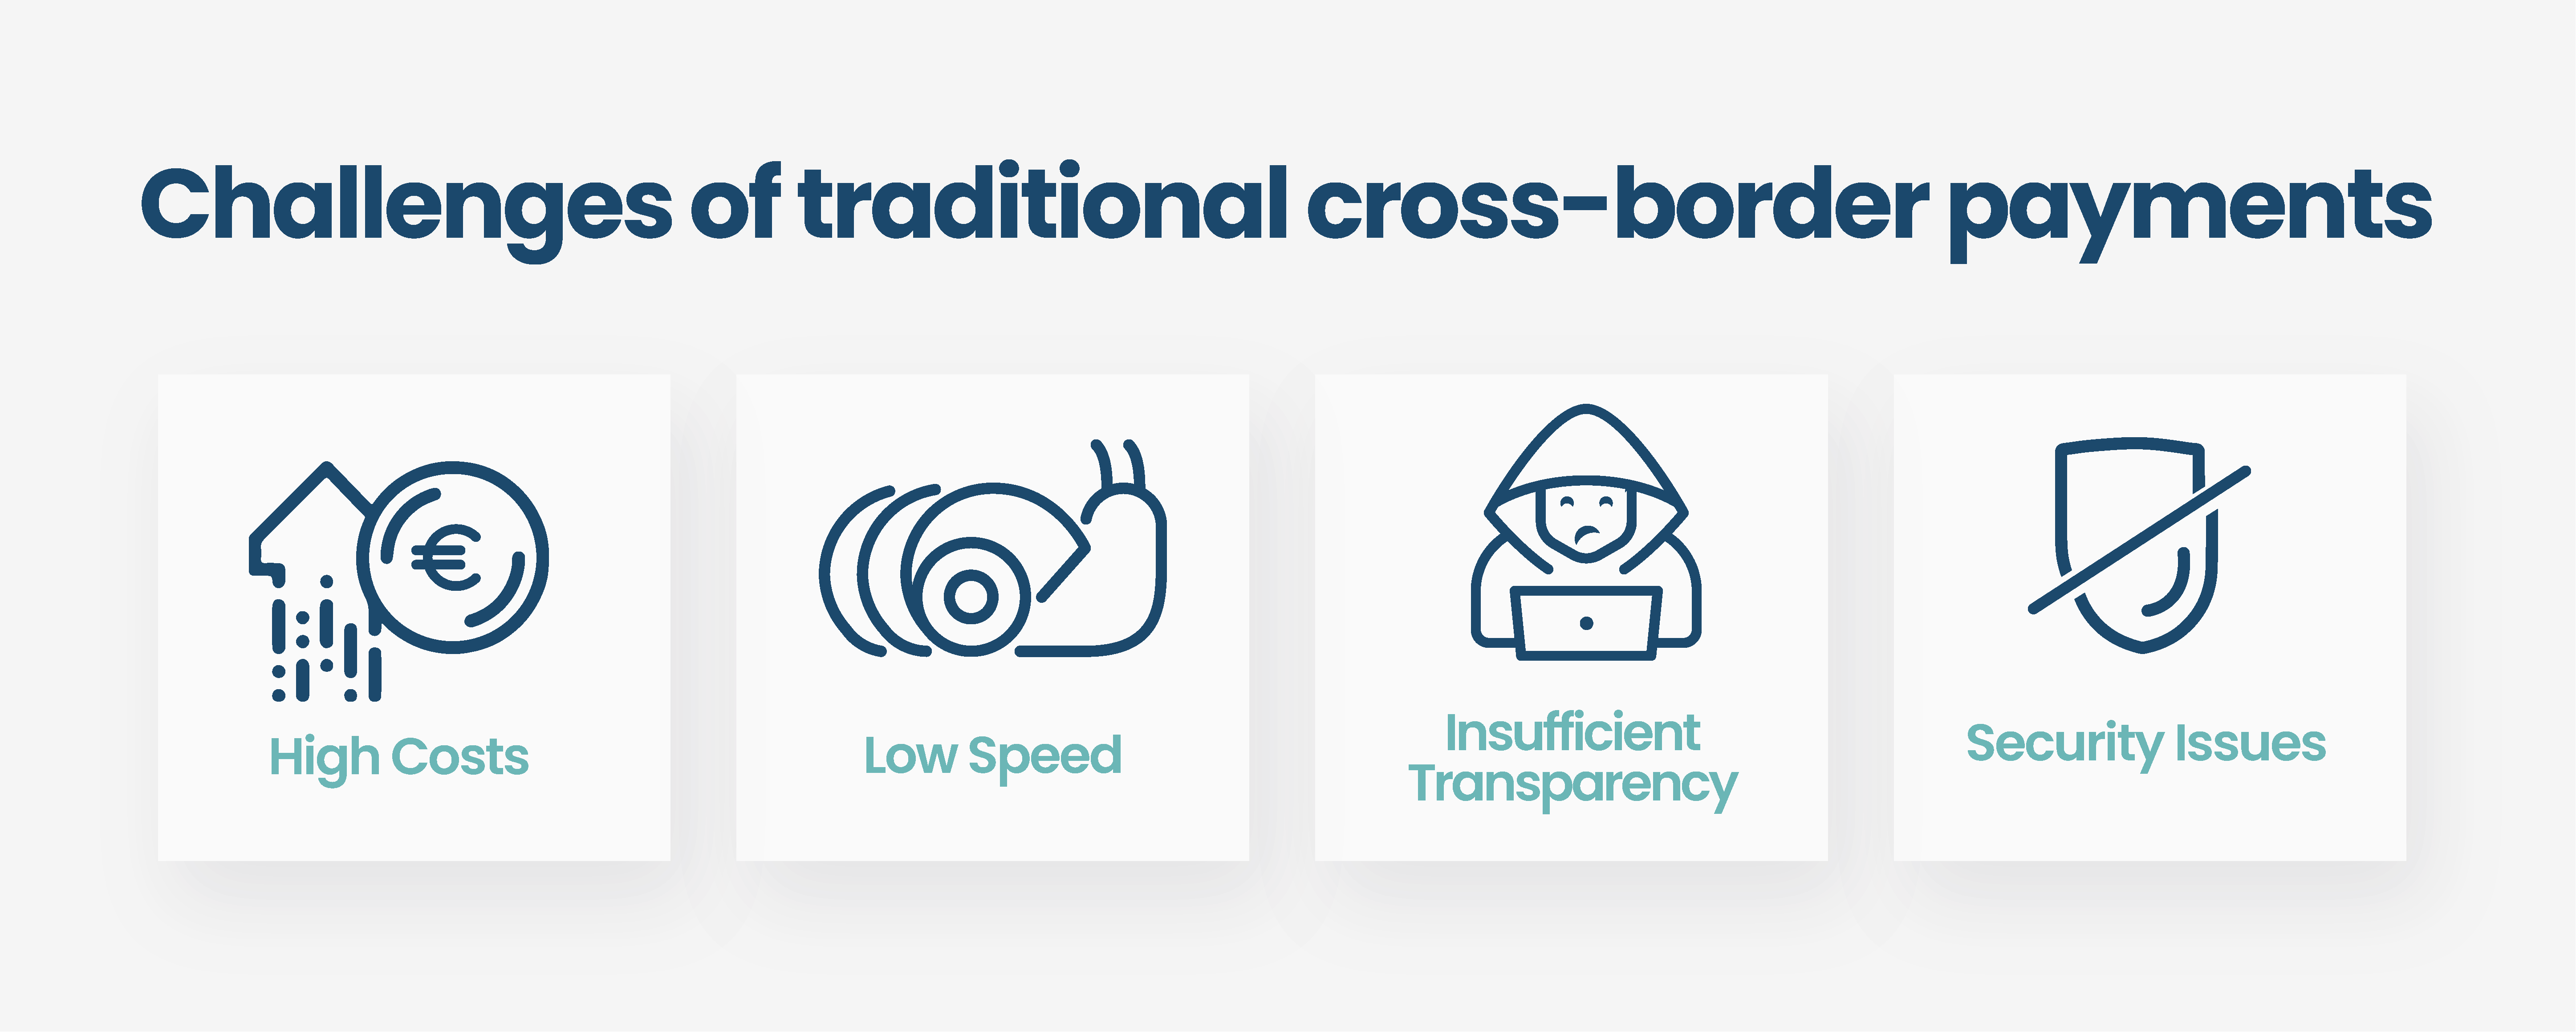 Challenges of traditional cross-border payments